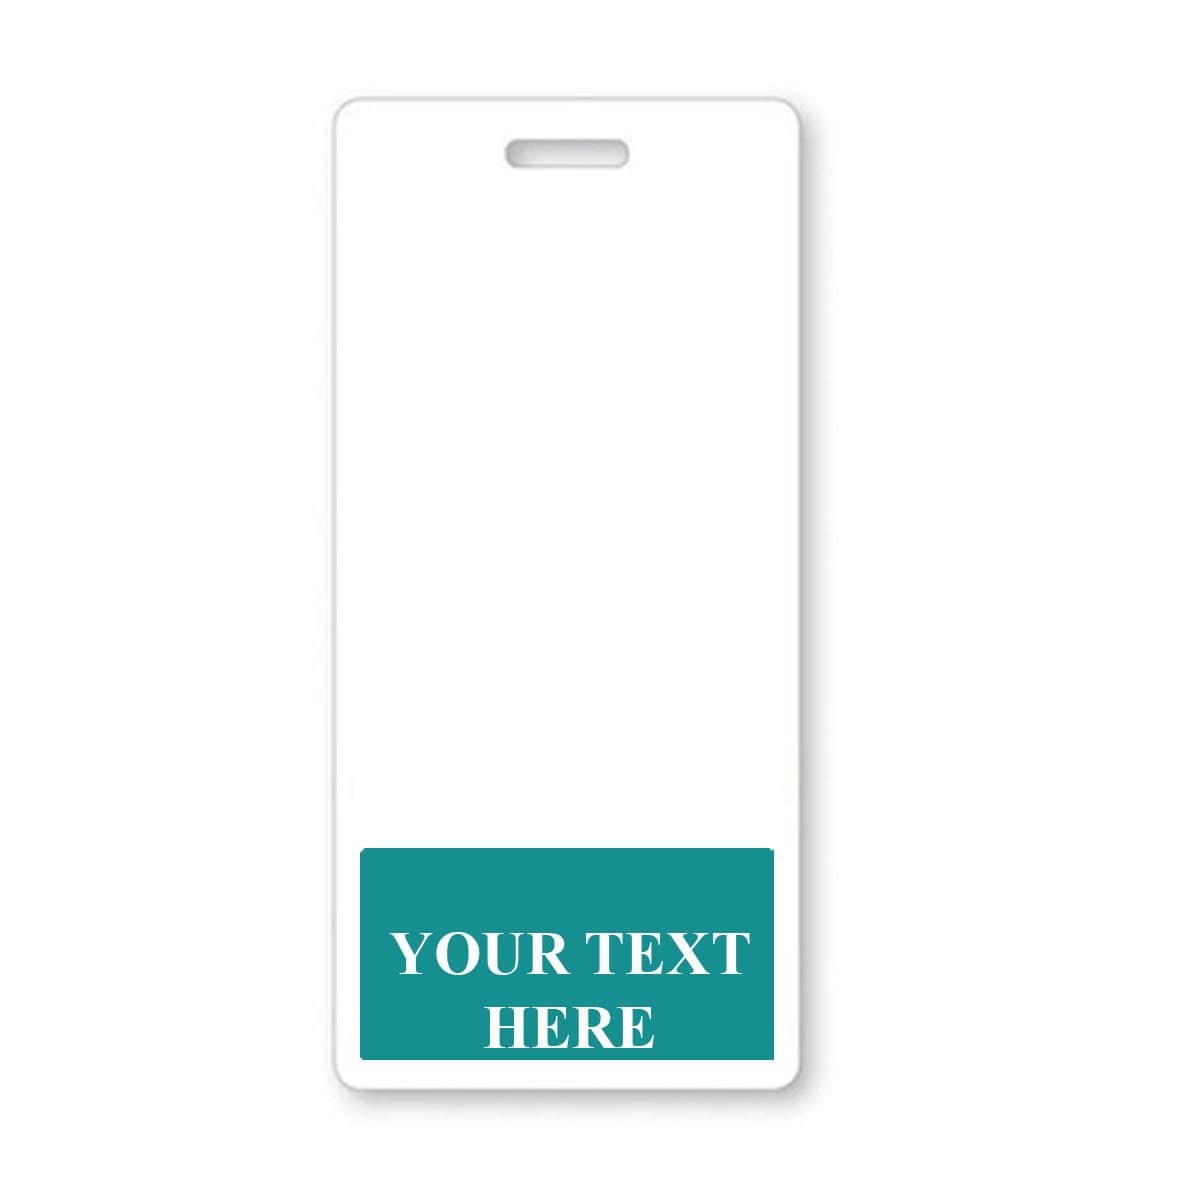 Custom Printed Badge Buddy Vertical (Standard Size) with a slot at the top for a lanyard and a teal section at the bottom labeled "YOUR TEXT HERE," perfect for custom badge buddies.